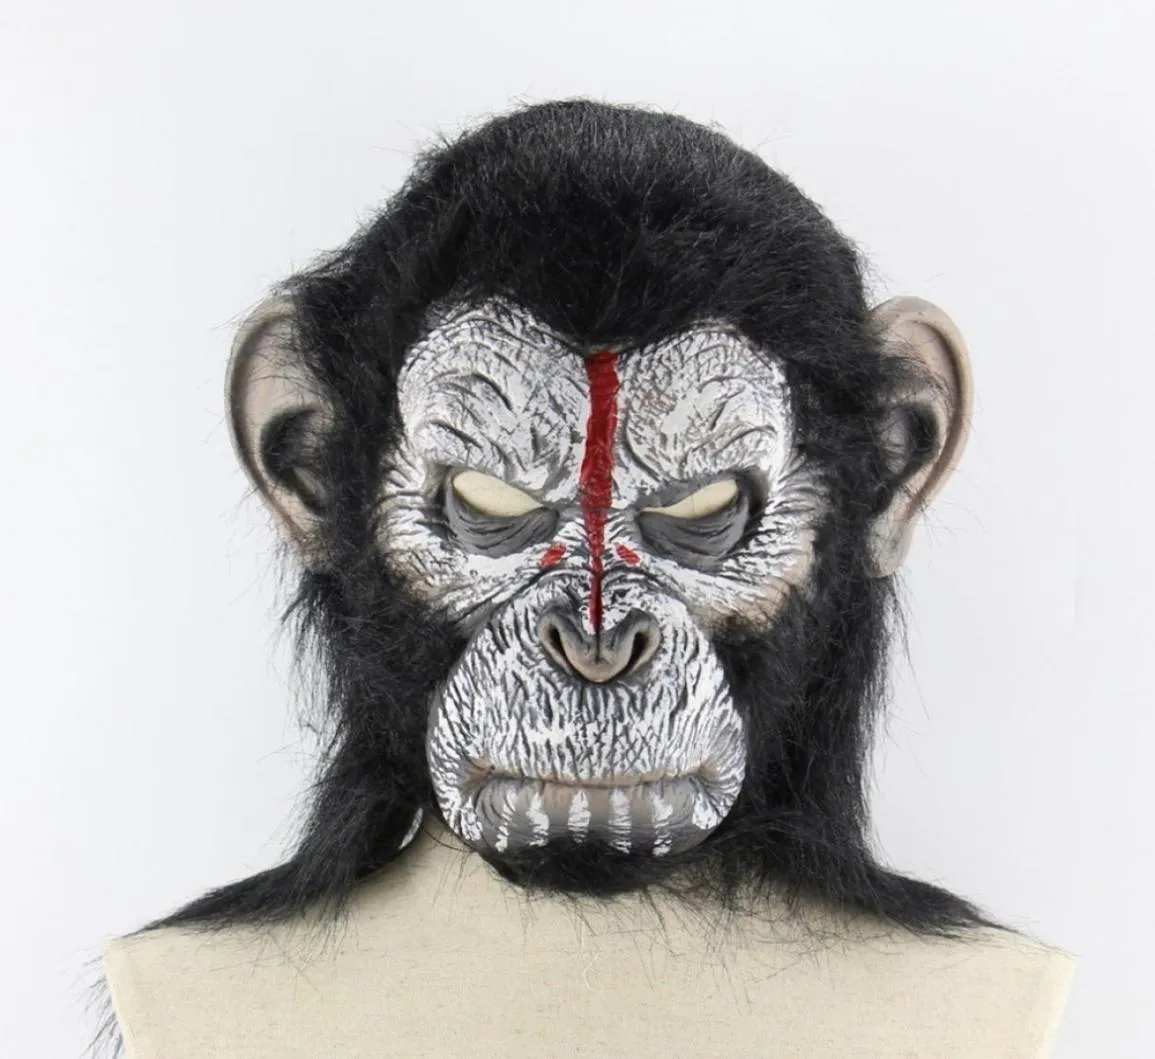 Planet Of The Apes Halloween Cosplay Gorilla Masquerade Mask Monkey King Costumes Caps Realistic Monkey Mask Y2001035371531